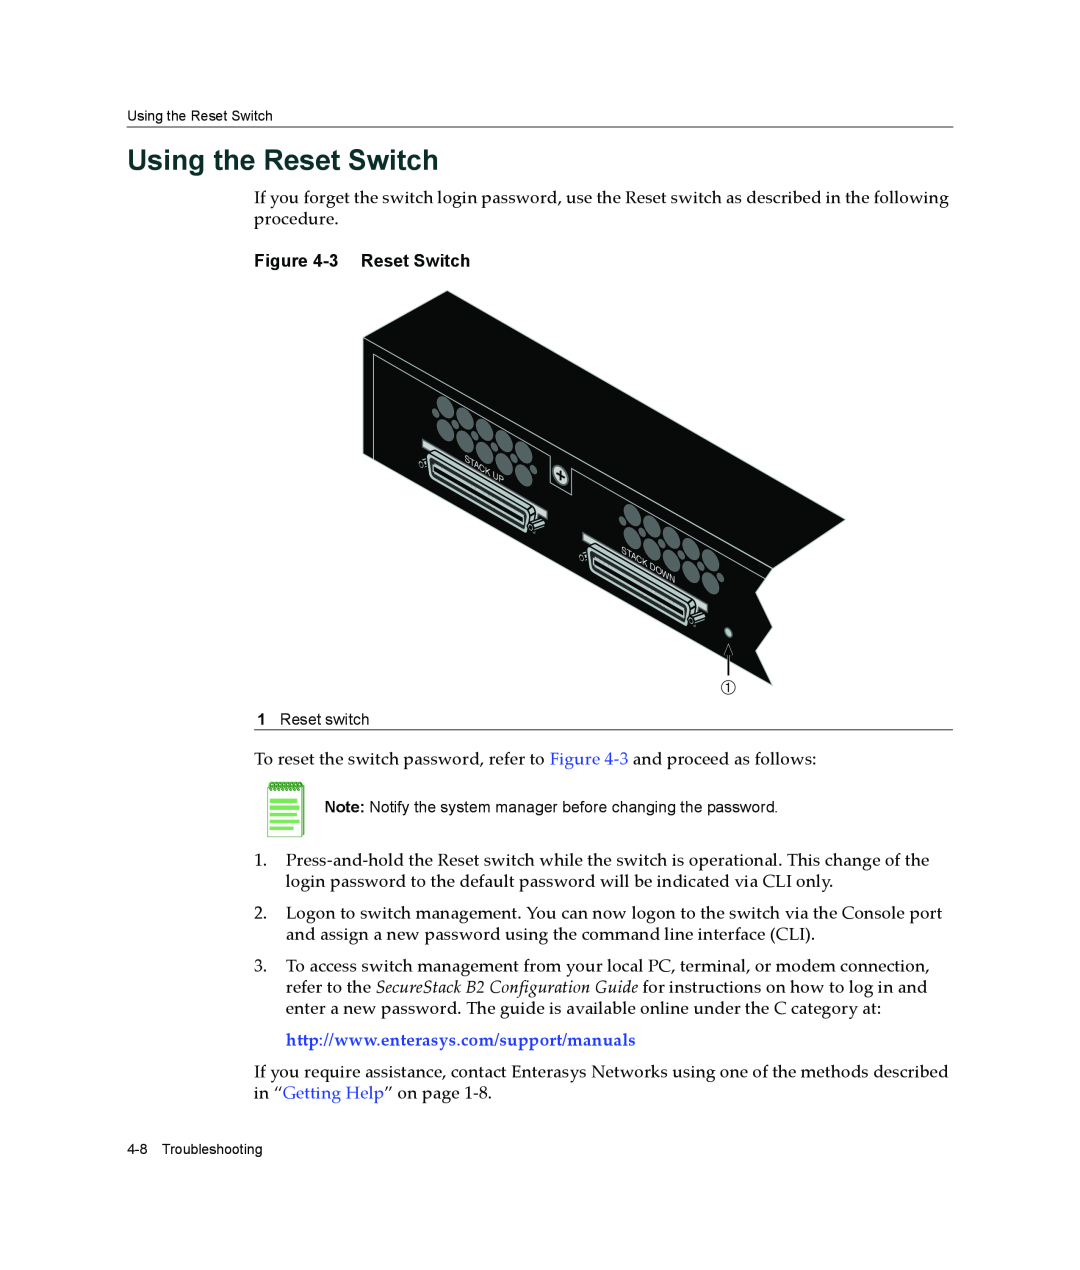 Enterasys Networks B2G124-24 manual Using the Reset Switch 